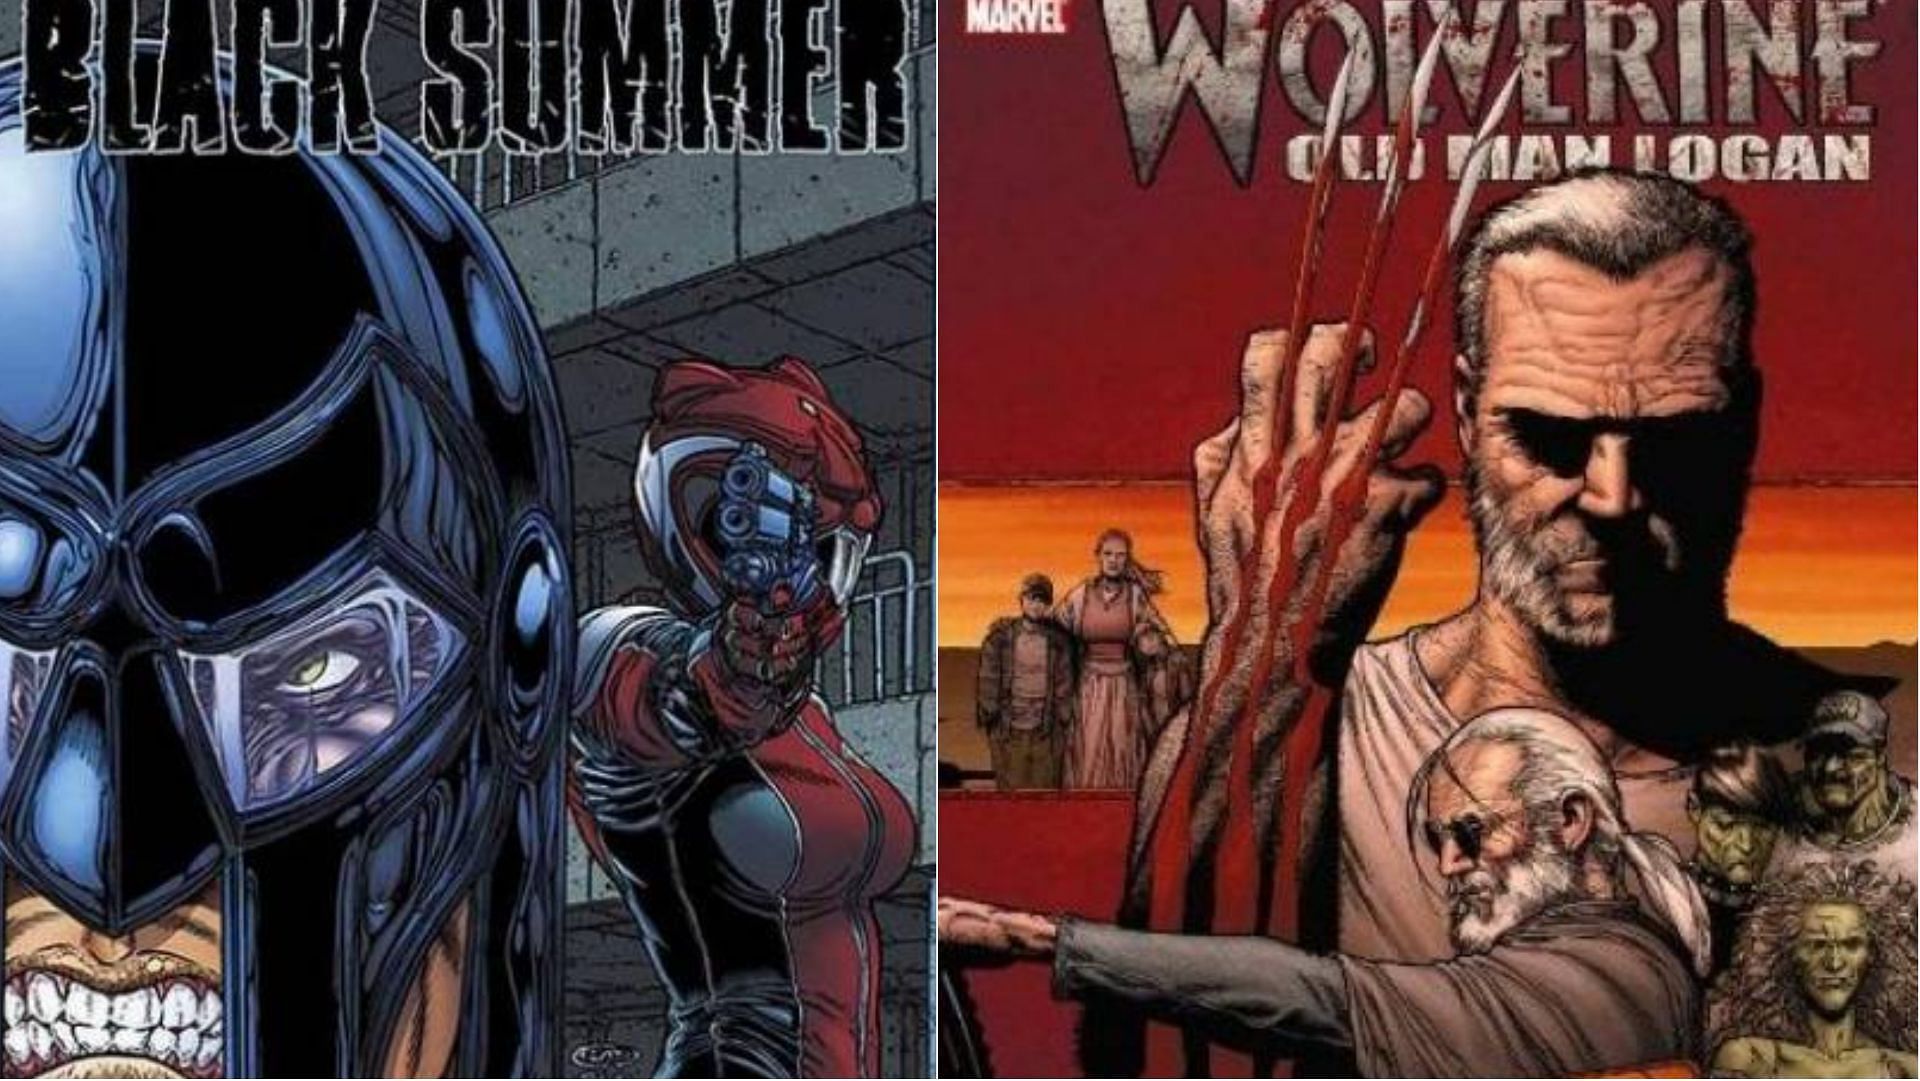 The best comics with the dark storylines (Image via Avatar Press and Marvel)